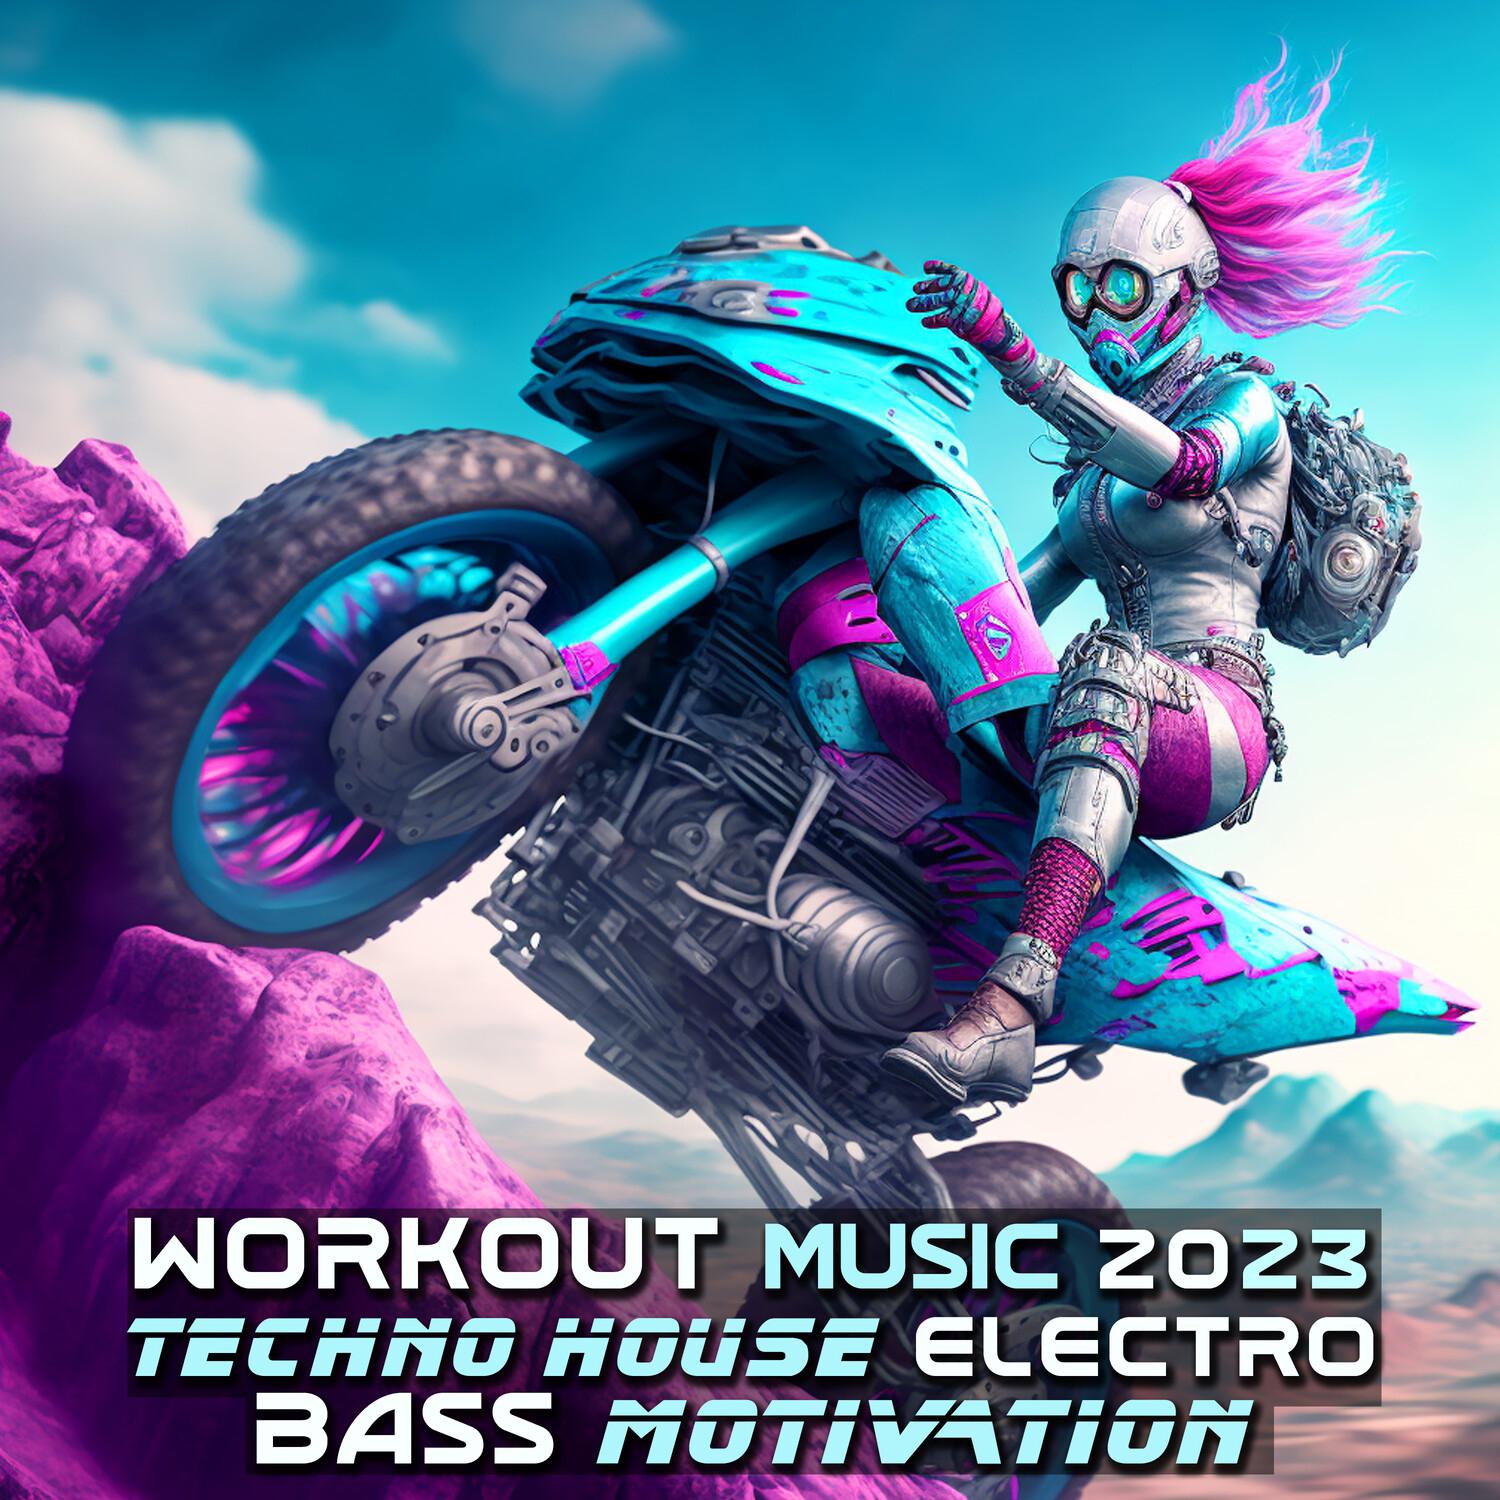 Workout Trance - March Through The Woods (Electronic Dance Mixed)